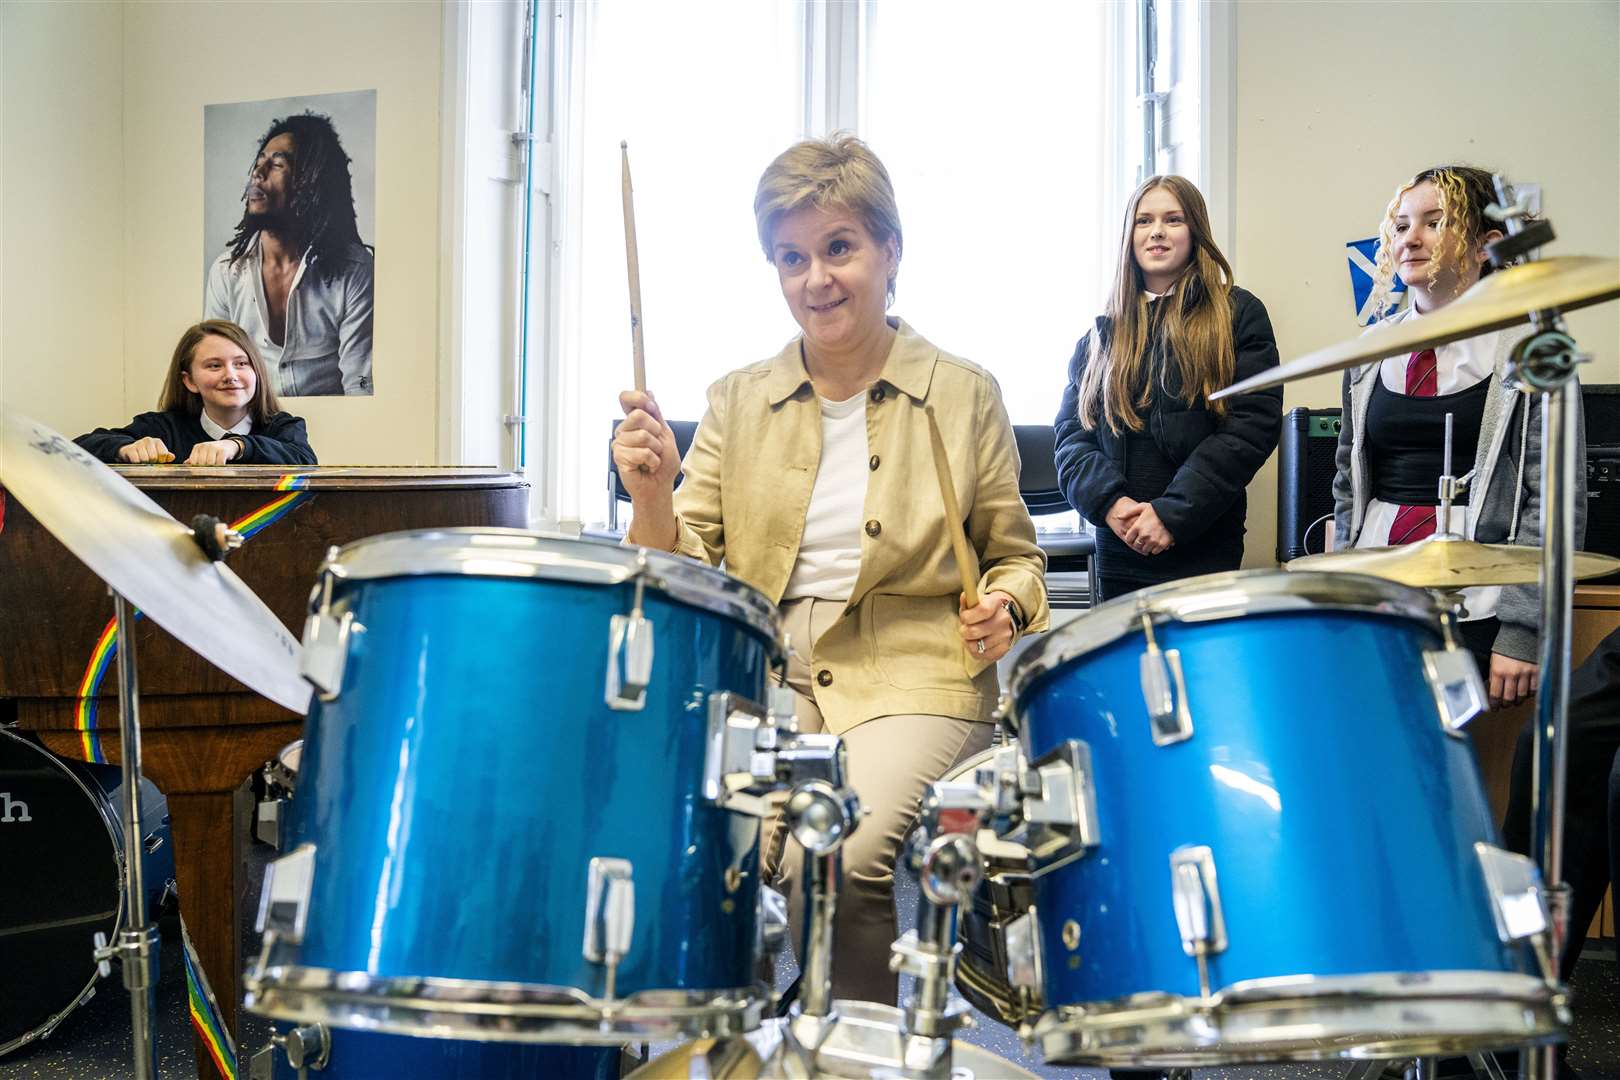 First Minister Nicola Sturgeon banged the drum for Scottish independence during a visit to Royston Youth Action Club in Glasgow in April (Jane Barlow/PA)